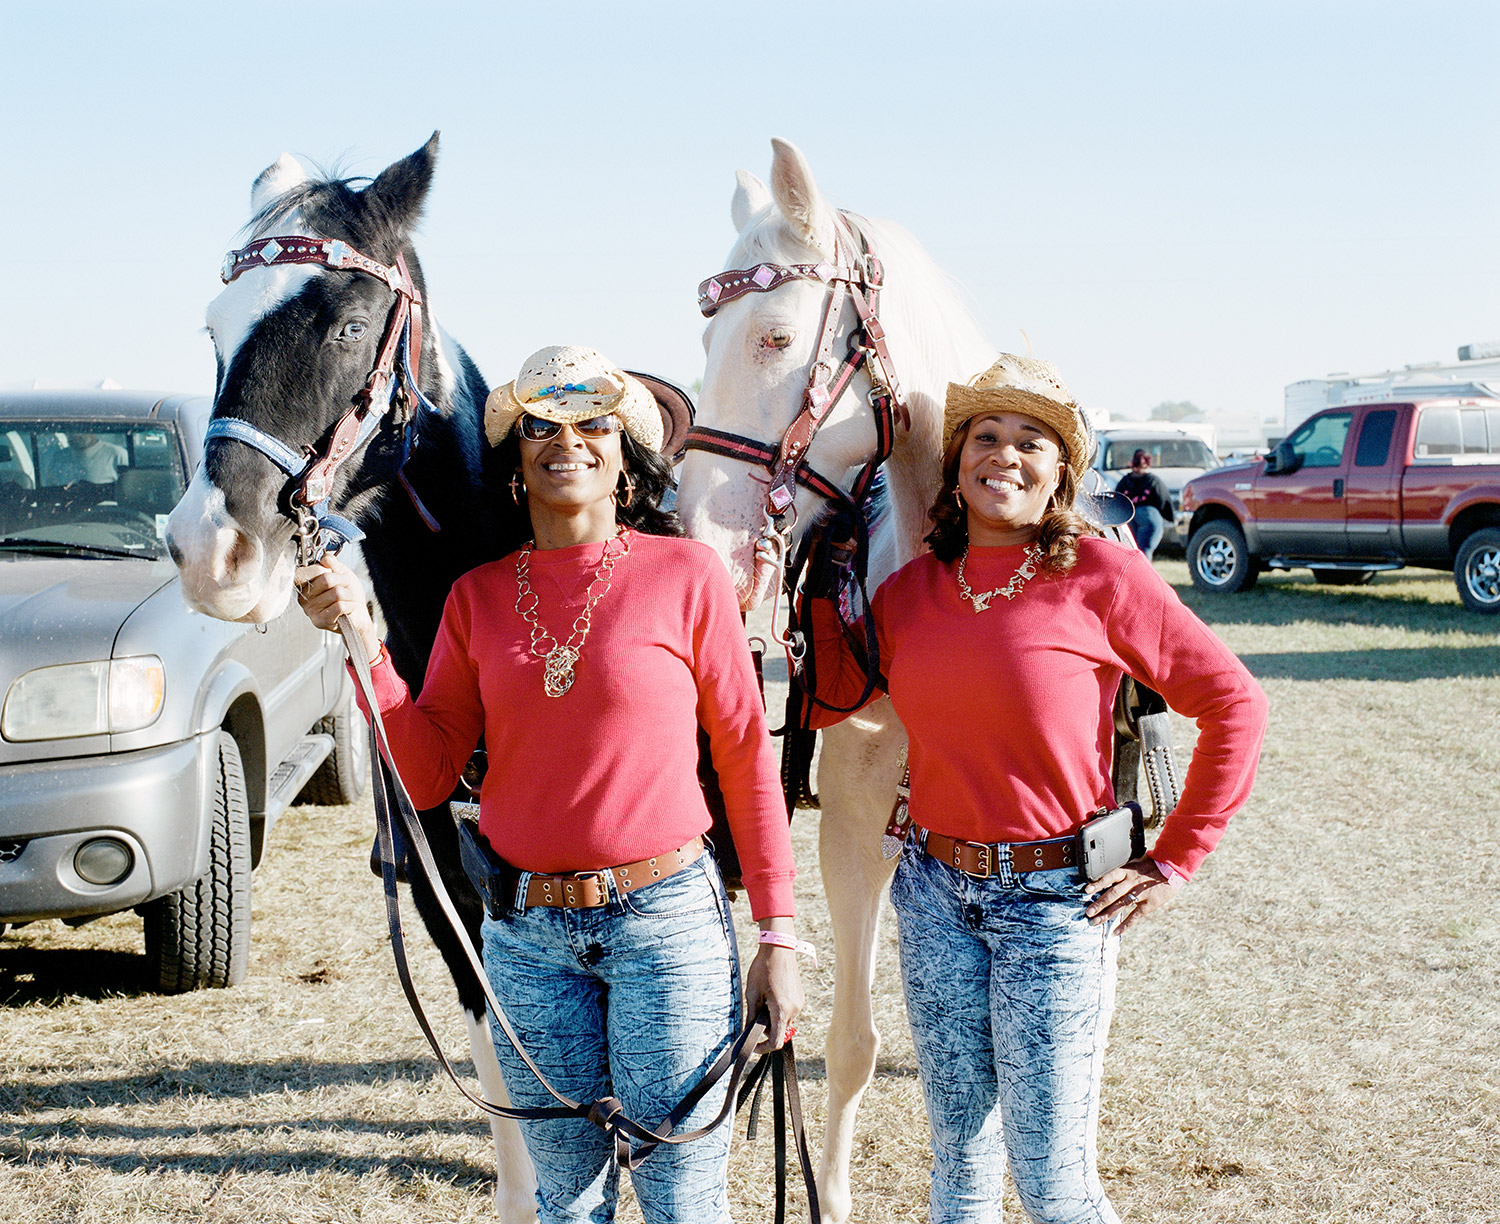 Members of the New Orleans based "Club 504 Girls" pose for a photo at a trail ride in Southern Louisiana. 2014